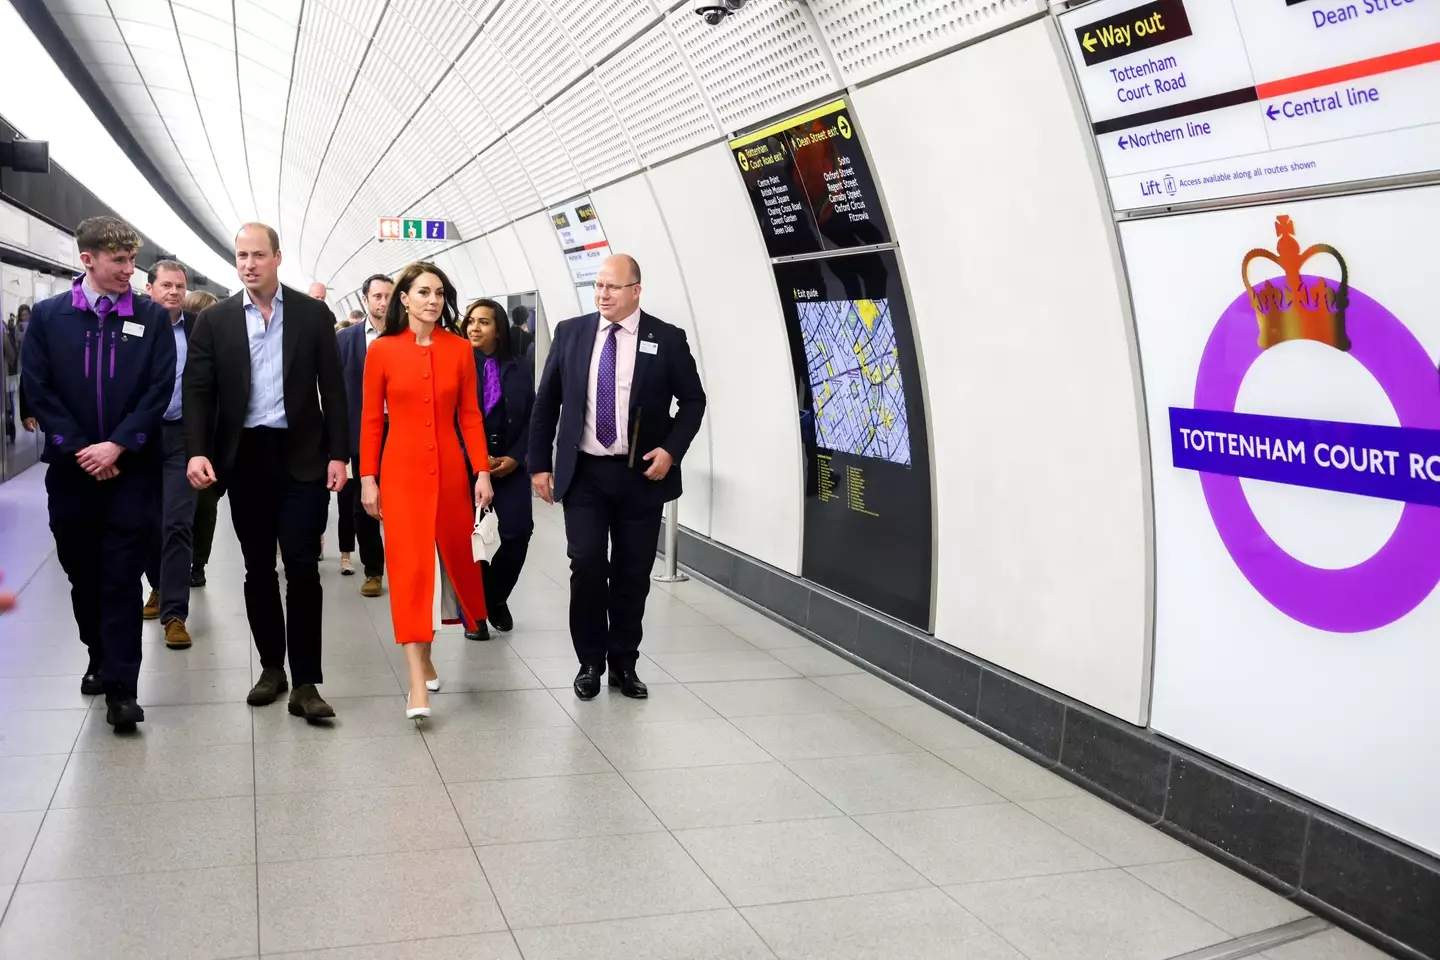 Prince William called the new tube line 'pretty good'.